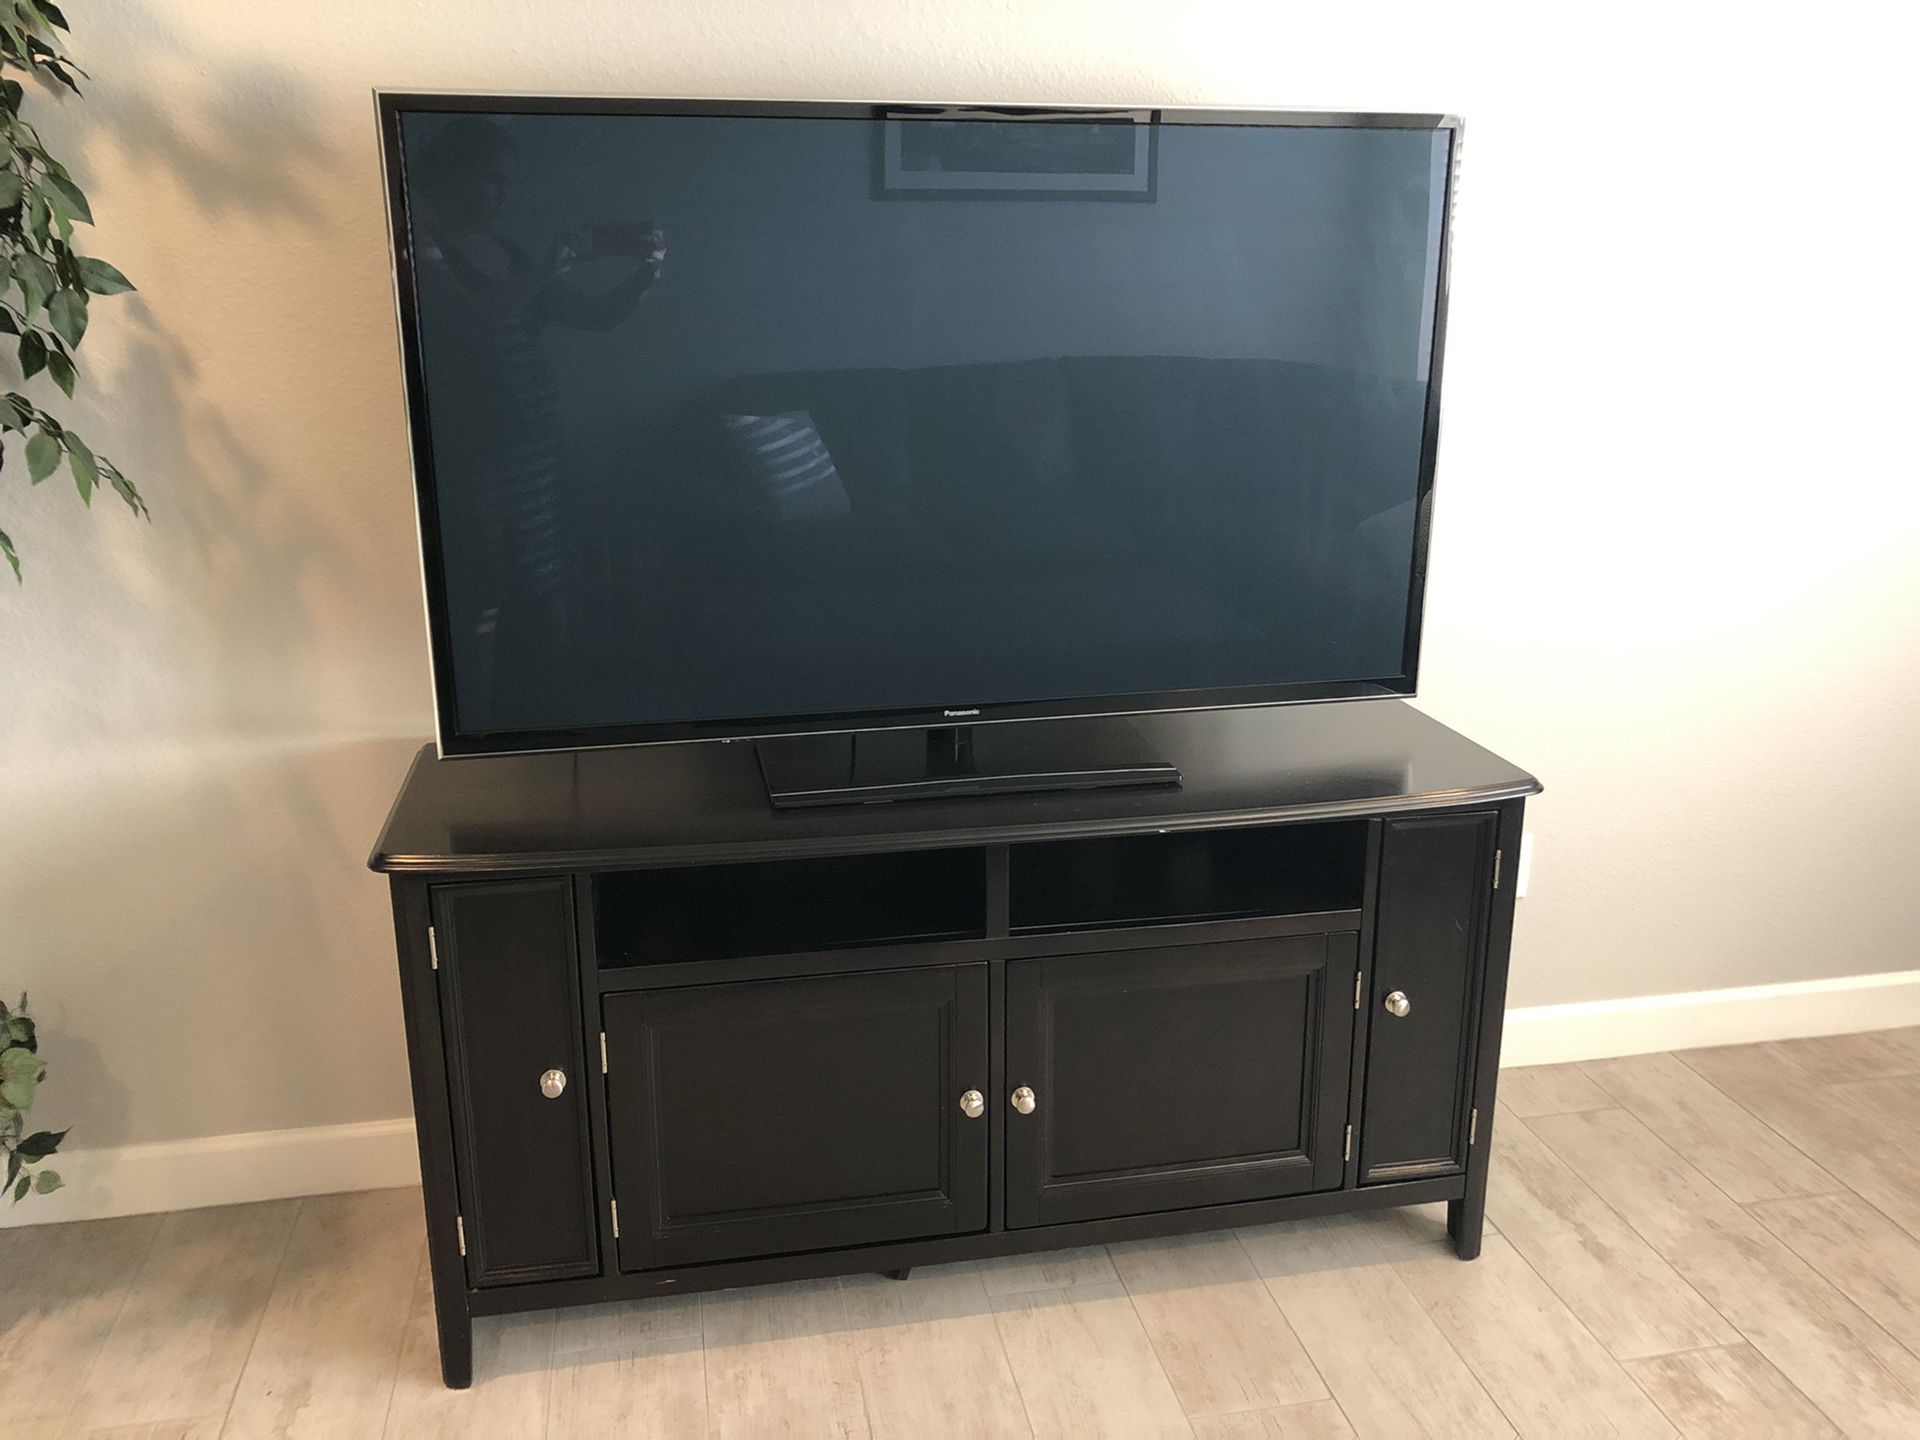 60” Panasonic flat screen tv with 60” wide TV stand